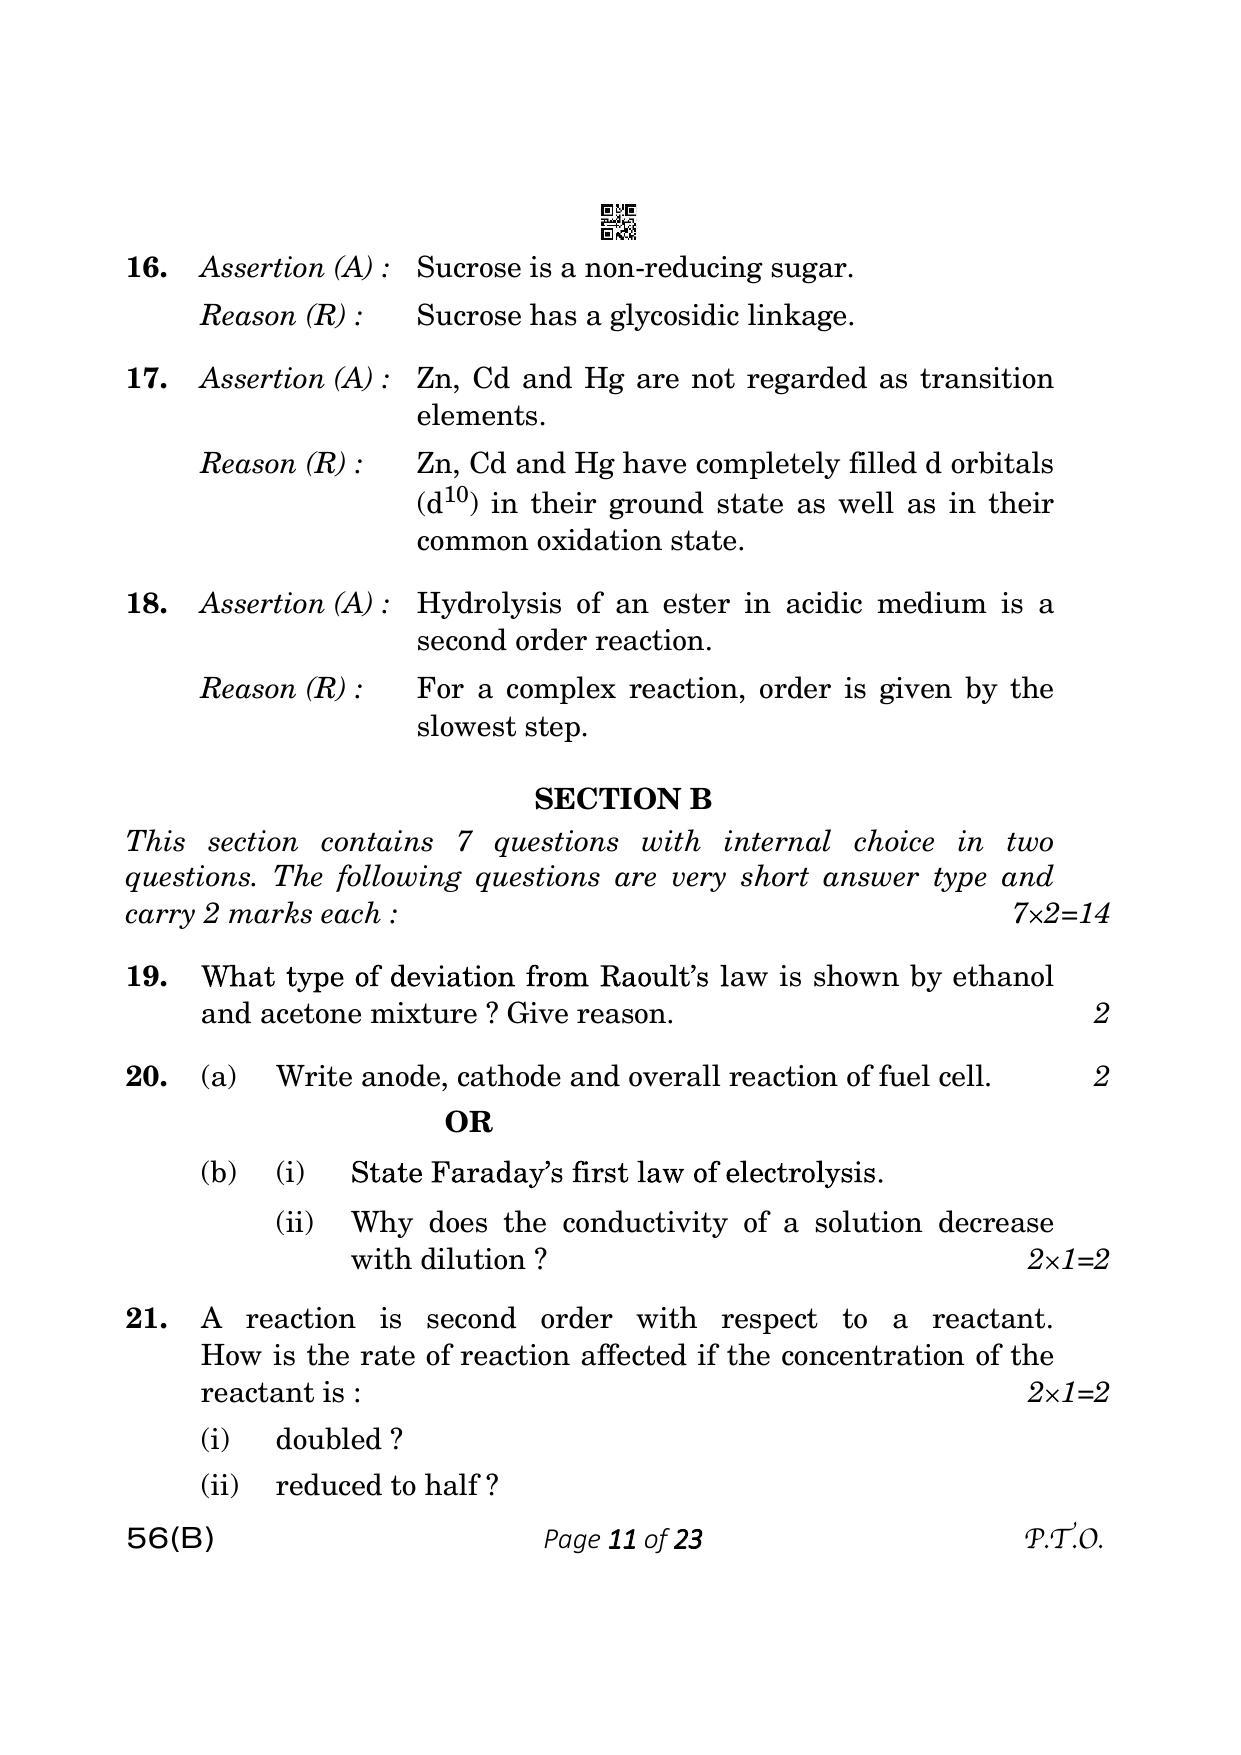 CBSE Class 12 56-B Chemistry 2023 (Compartment) Question Paper - Page 11